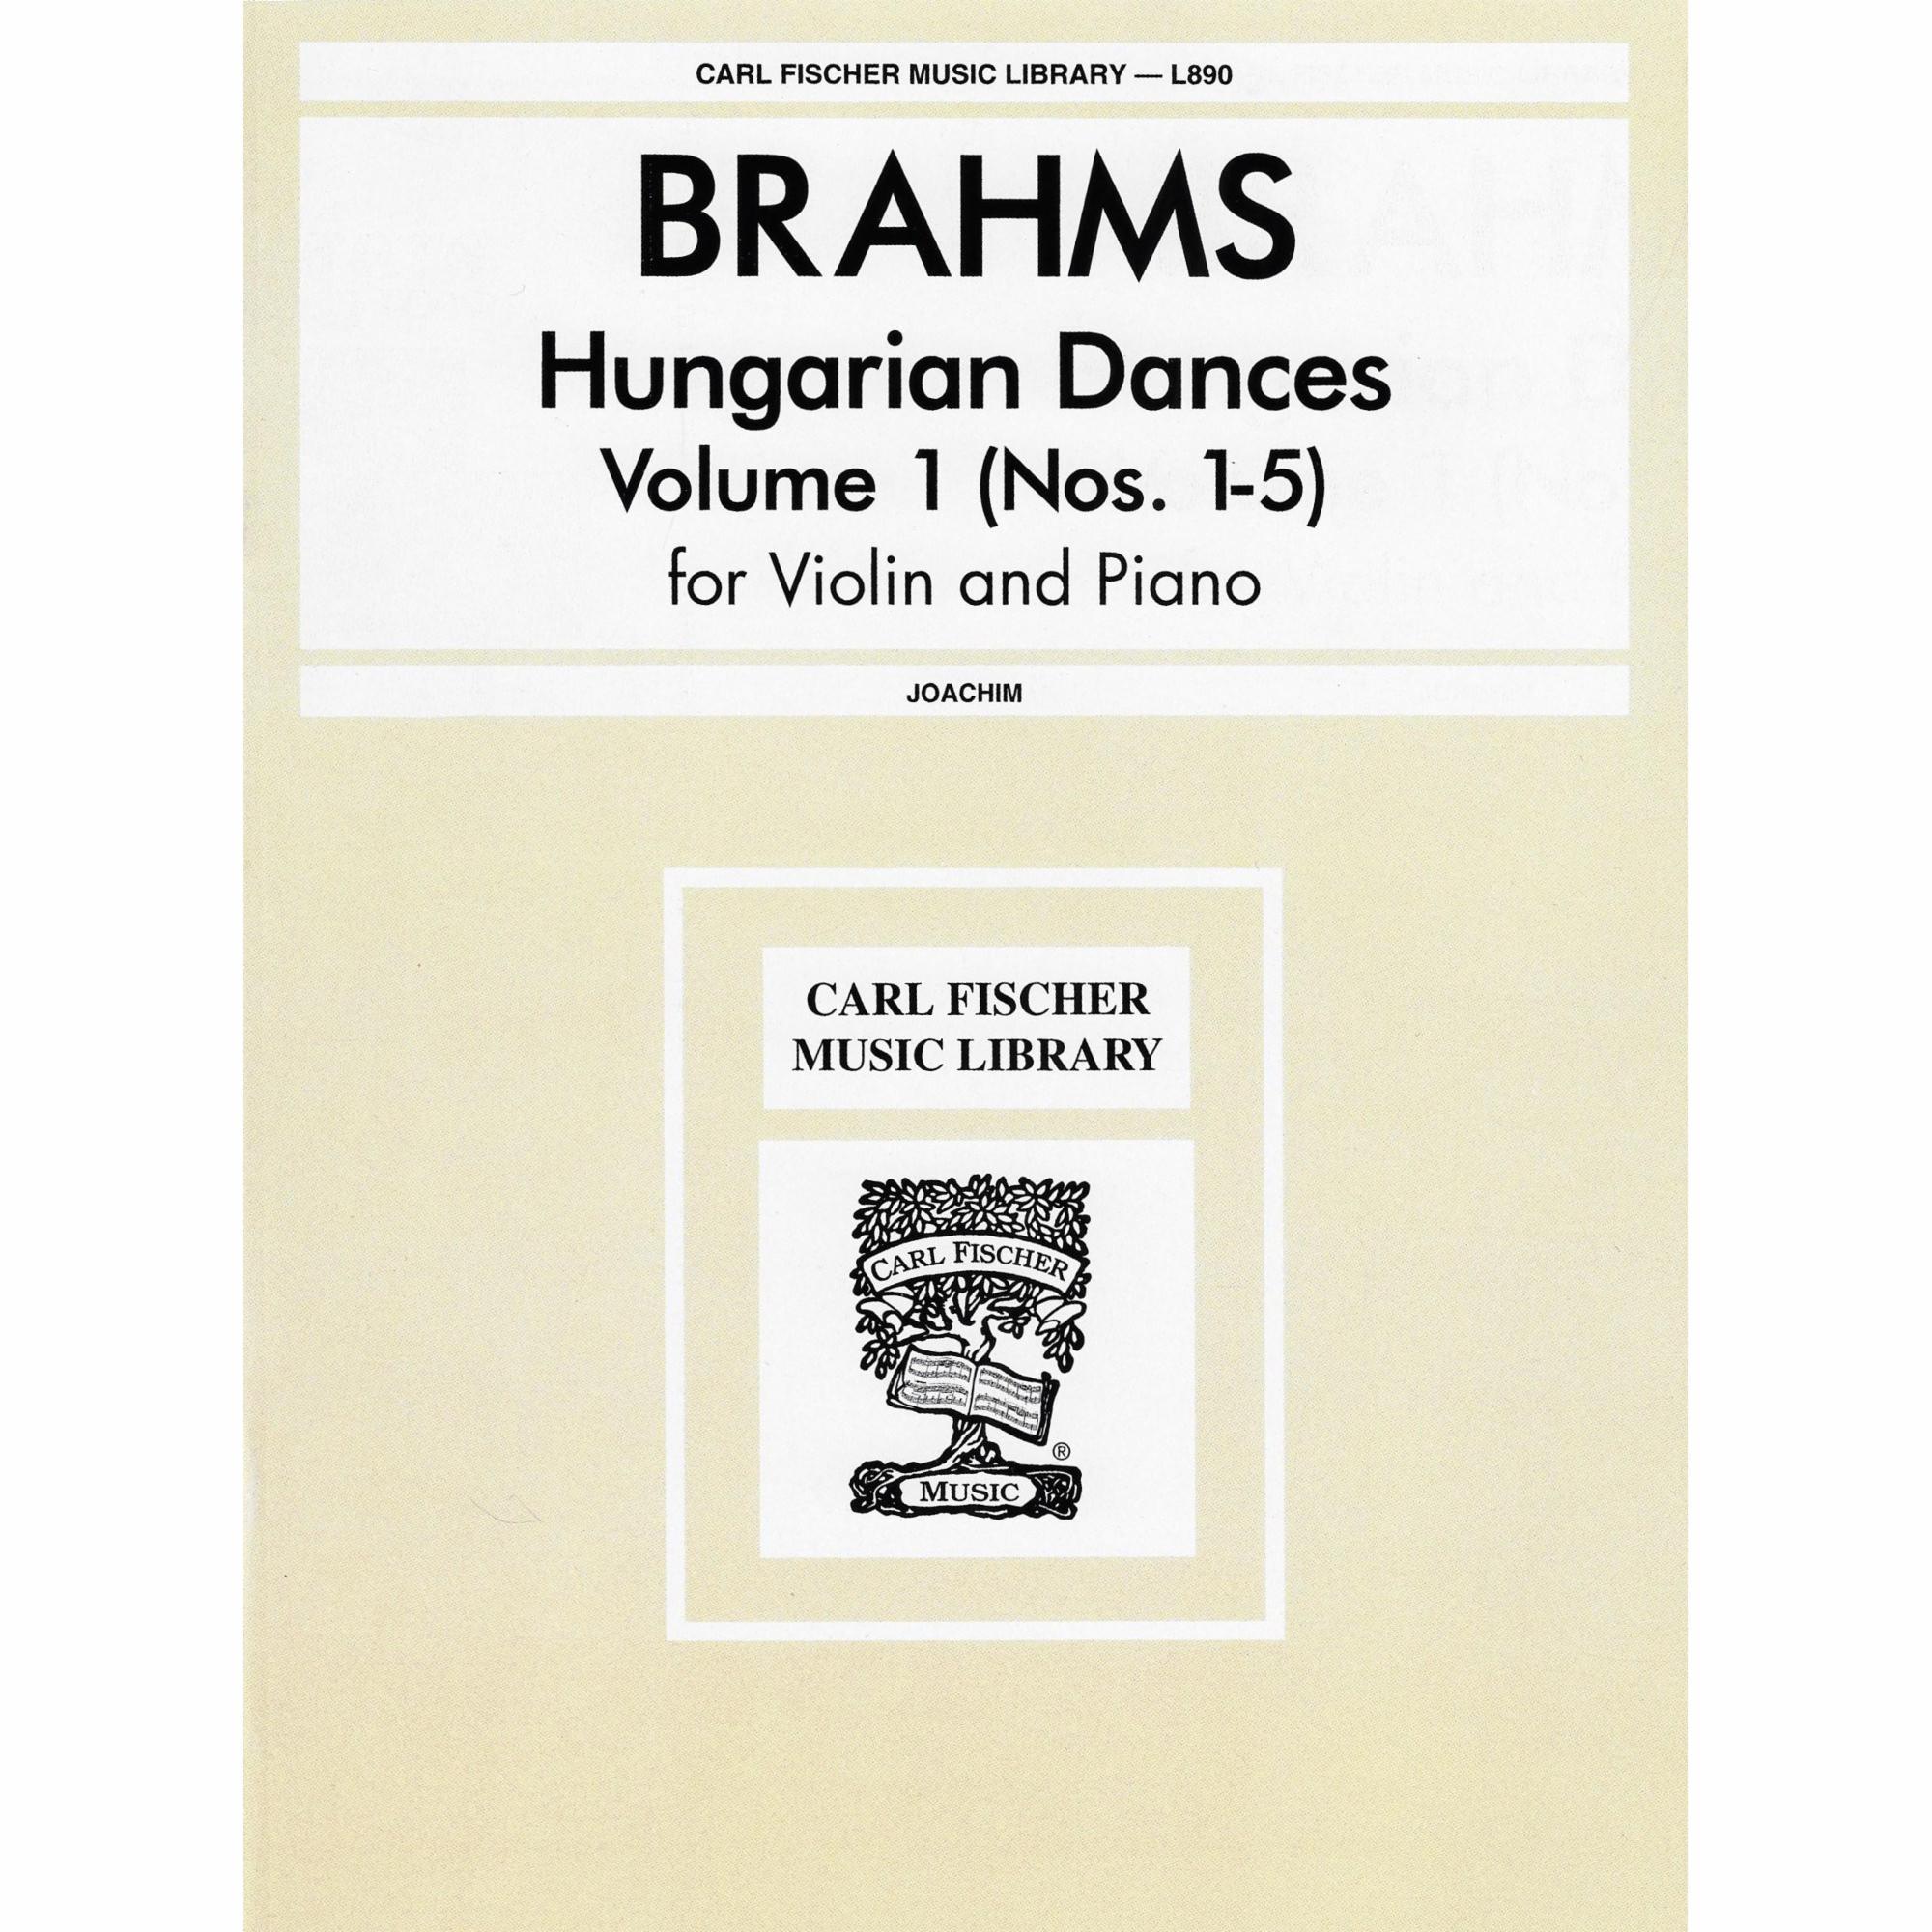 Brahms -- Hungarian Dances, Volume 1 (Nos. 1-5) for Violin and Piano